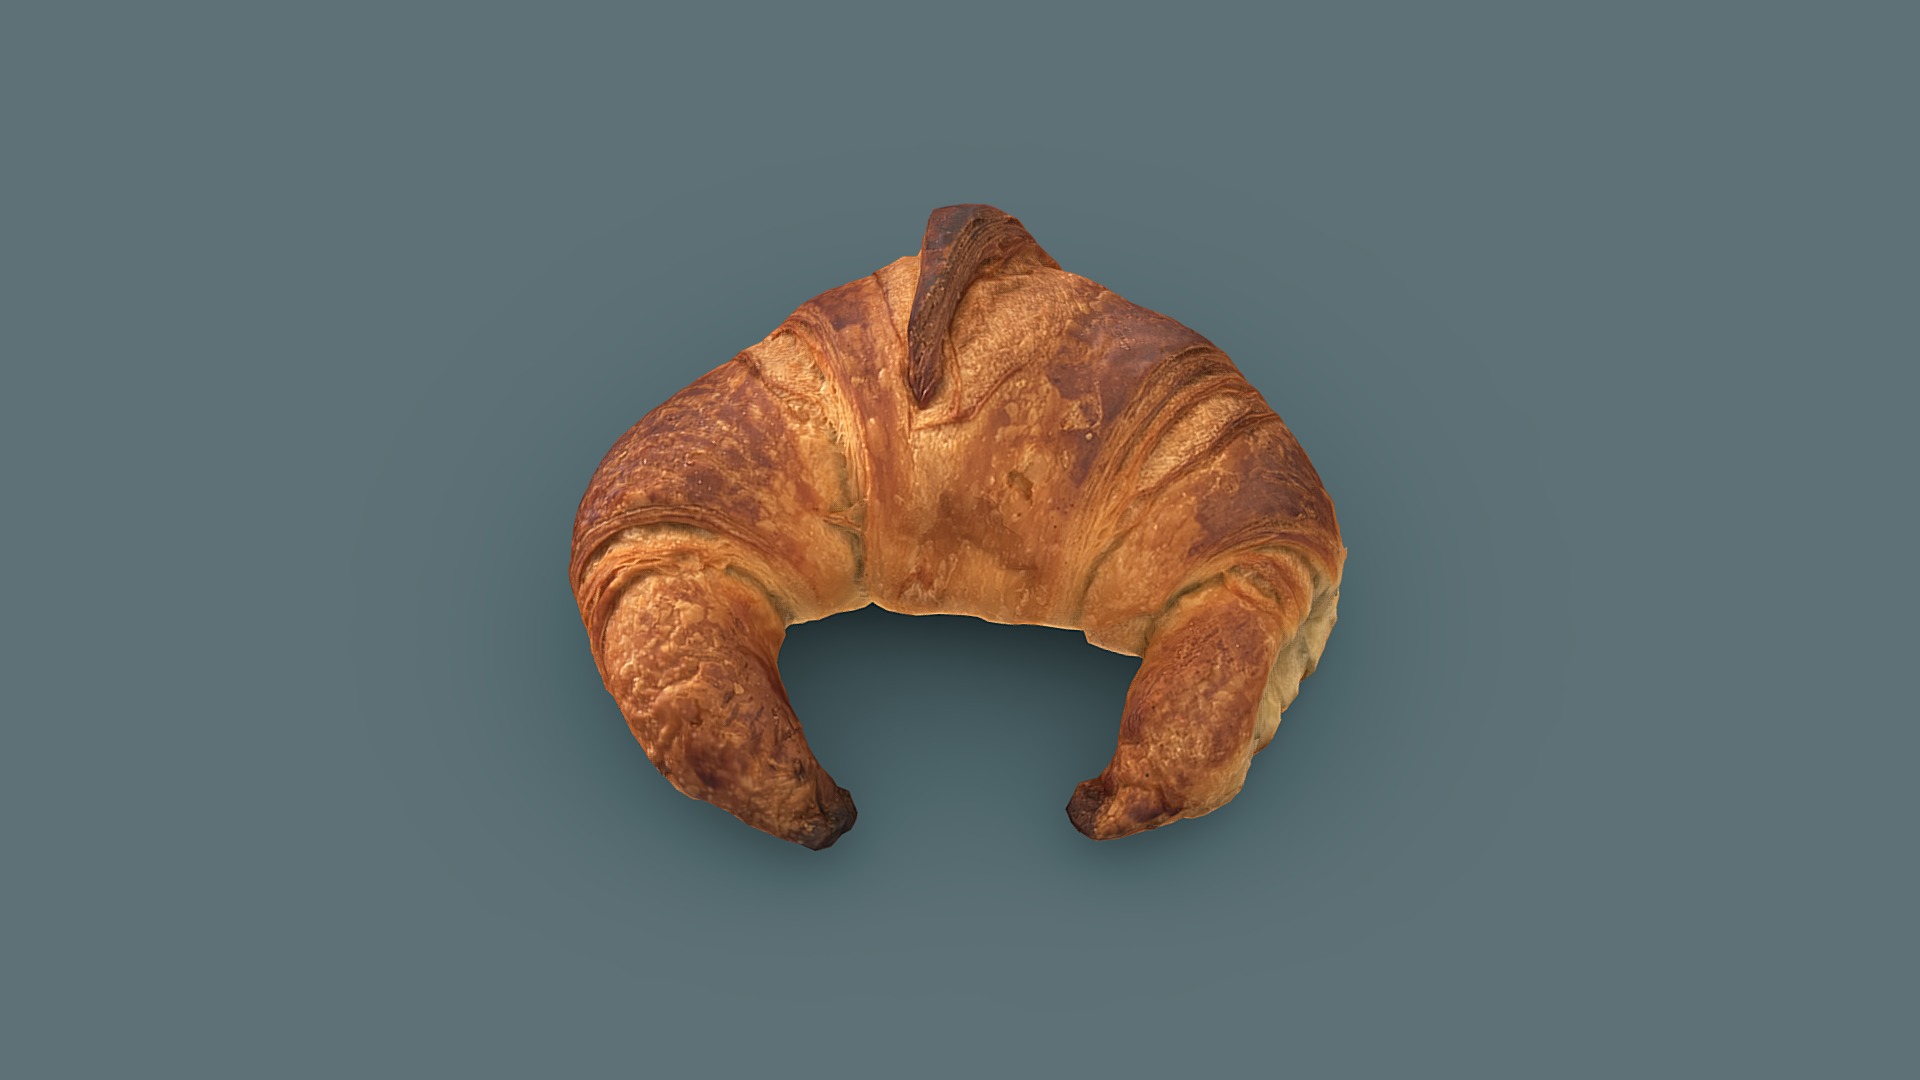 This is a croissant. And this is a pain au chocolat. But I don't know what a chocolate croissant or a chocolatine is :)

————————————————————————————————————————————————————————————— 

DOWNLOAD — Also available for dowload: sketchfab.com/louis/store

4K texture attached as additional file.

Want to learn more about the technical details of this model? Use Sketchfab's model inspector. Protip, just press &ldquo;I